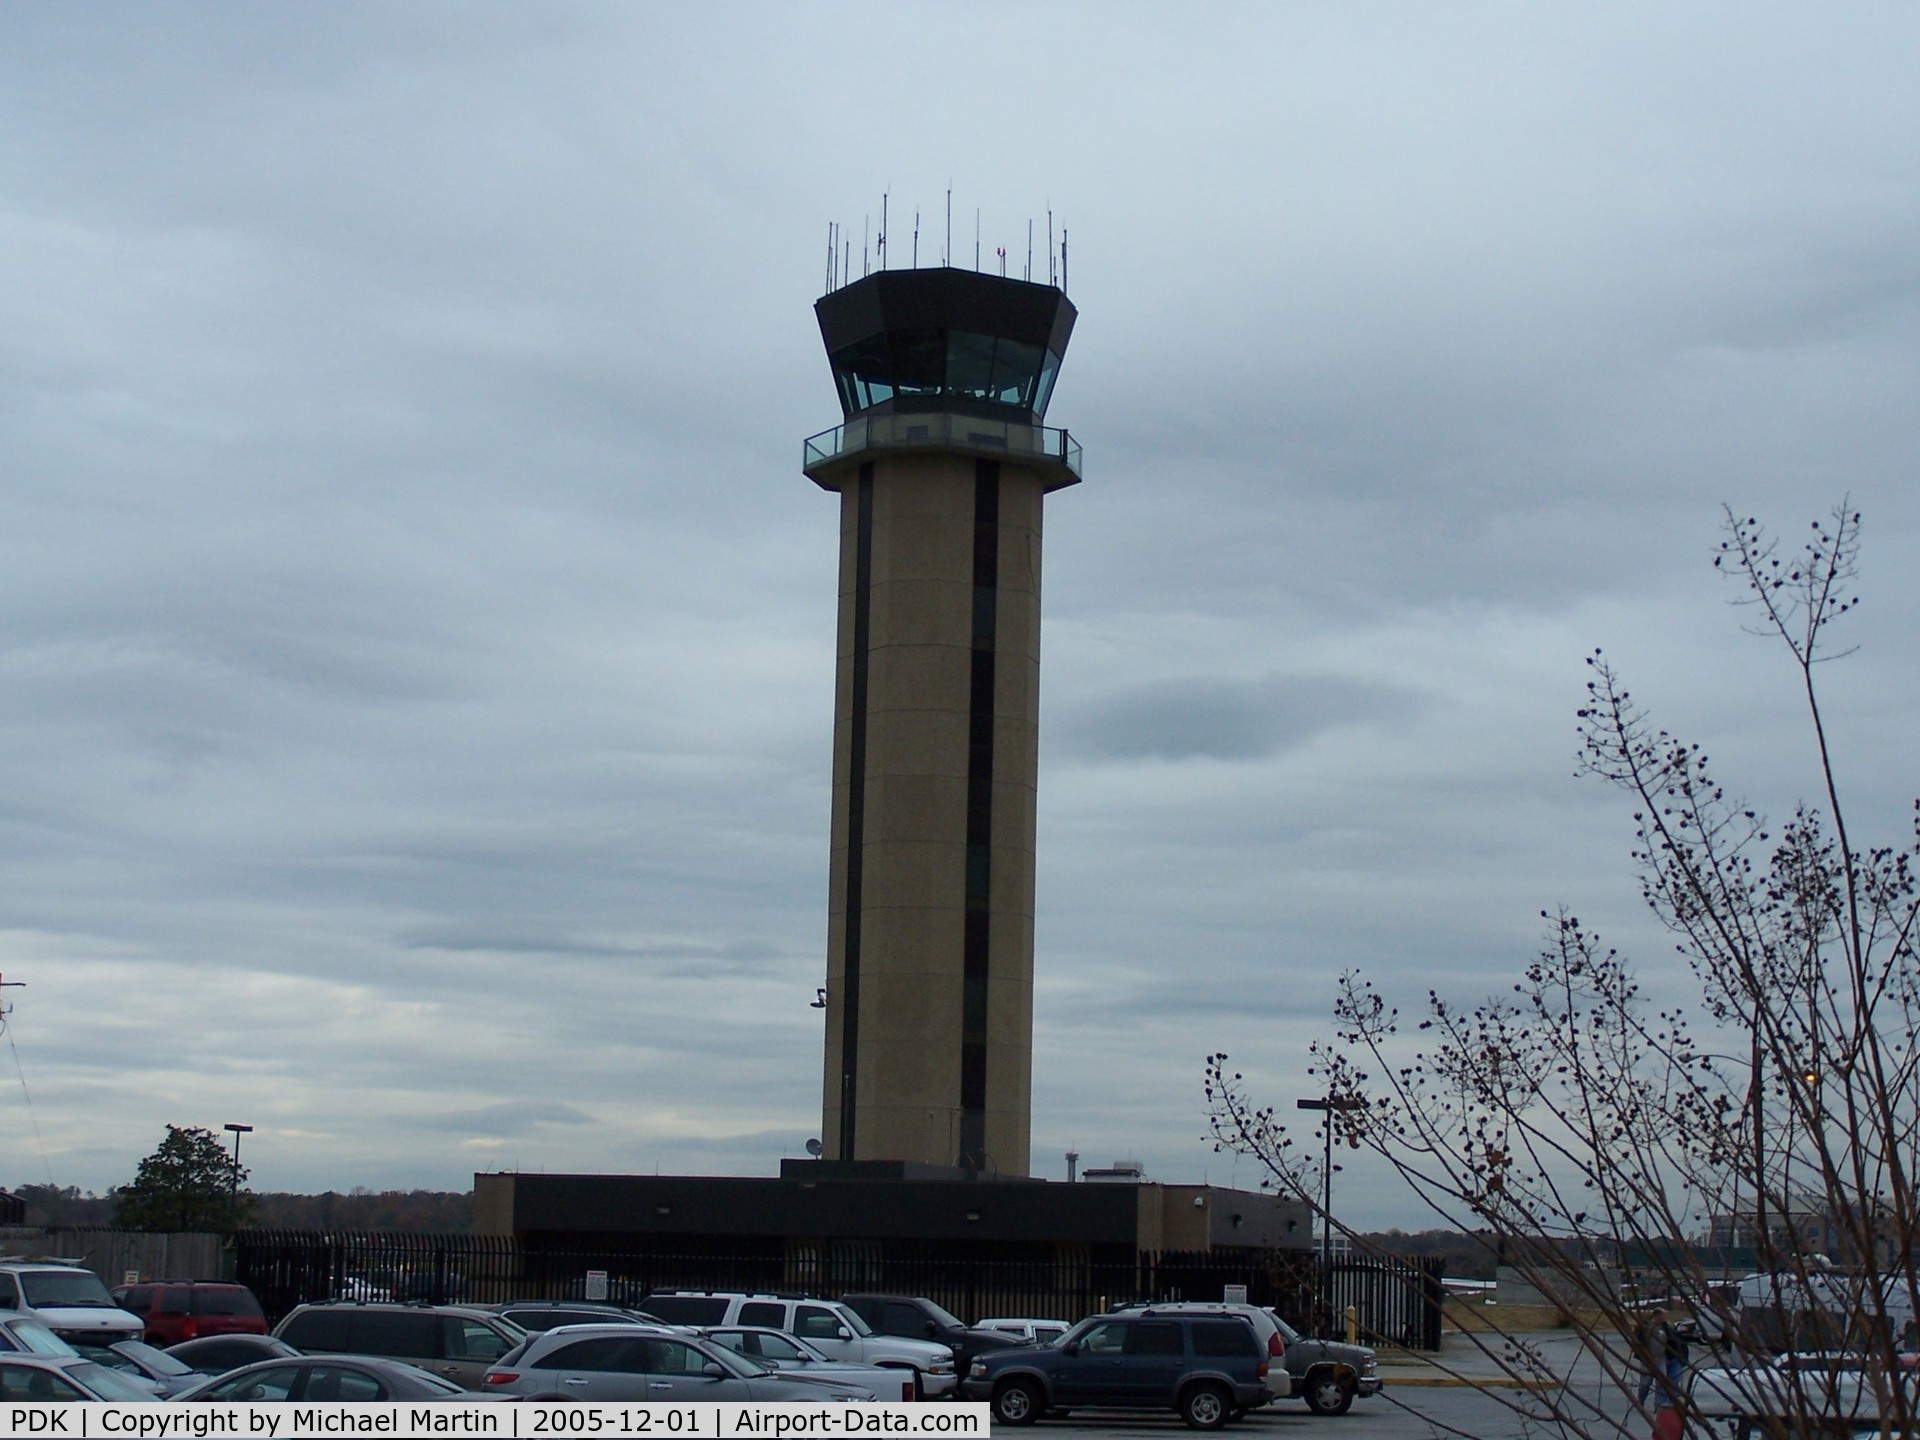 Dekalb-peachtree Airport (PDK) - PDK Tower standing firm in a cold & blustery day!